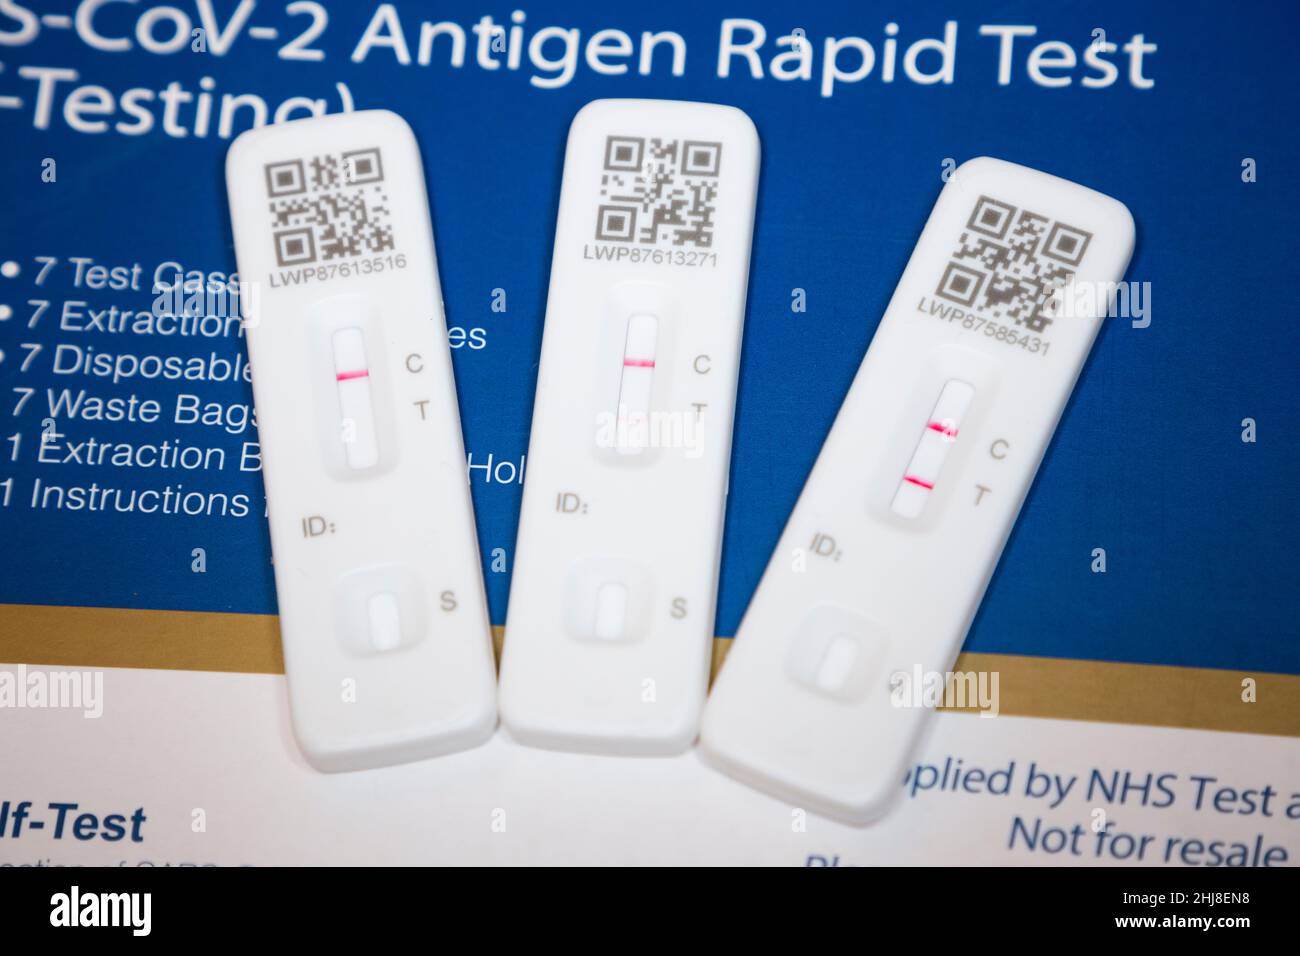 Two positive results and a single negative test result. Three Lateral flow test / LFT / LFD / lateral flow devices kits / device kit, two of which have tested positive (showing two red lines) for COVID 19 virus coronavirus during antigen home testing, in London. UK. To show positive, two red lines will appear. One test shows the positive line to be feint / faint. The third test showing one line only is a negative test. The test (by Flowfex made in China) has detected virus in the sample nasal swab taken from the nose. (128) Stock Photo